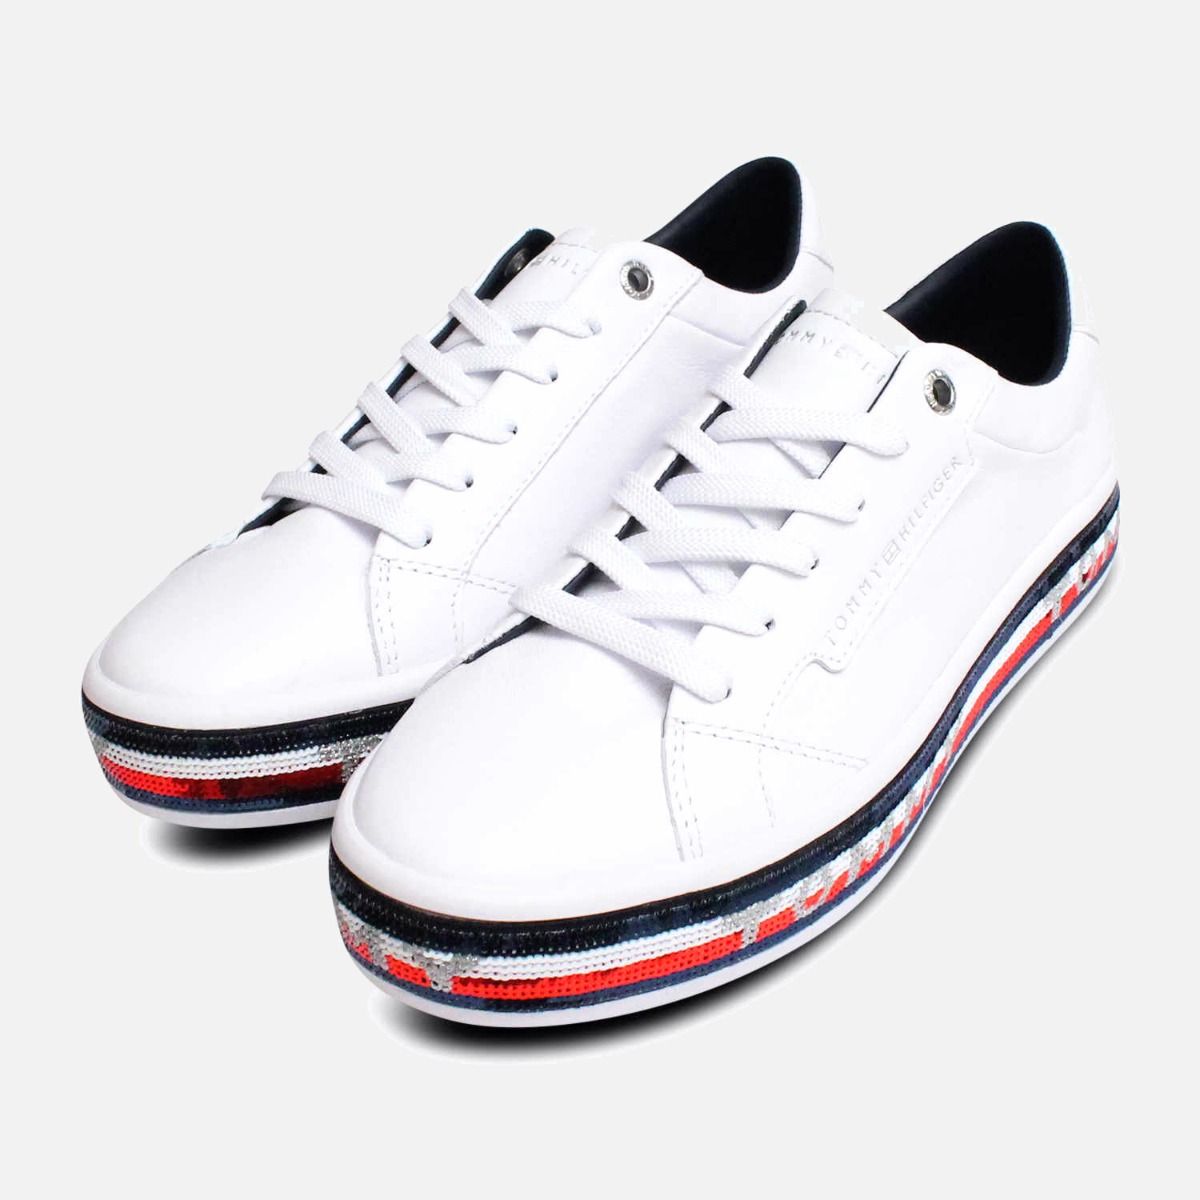 tommy hilfiger sneakers red